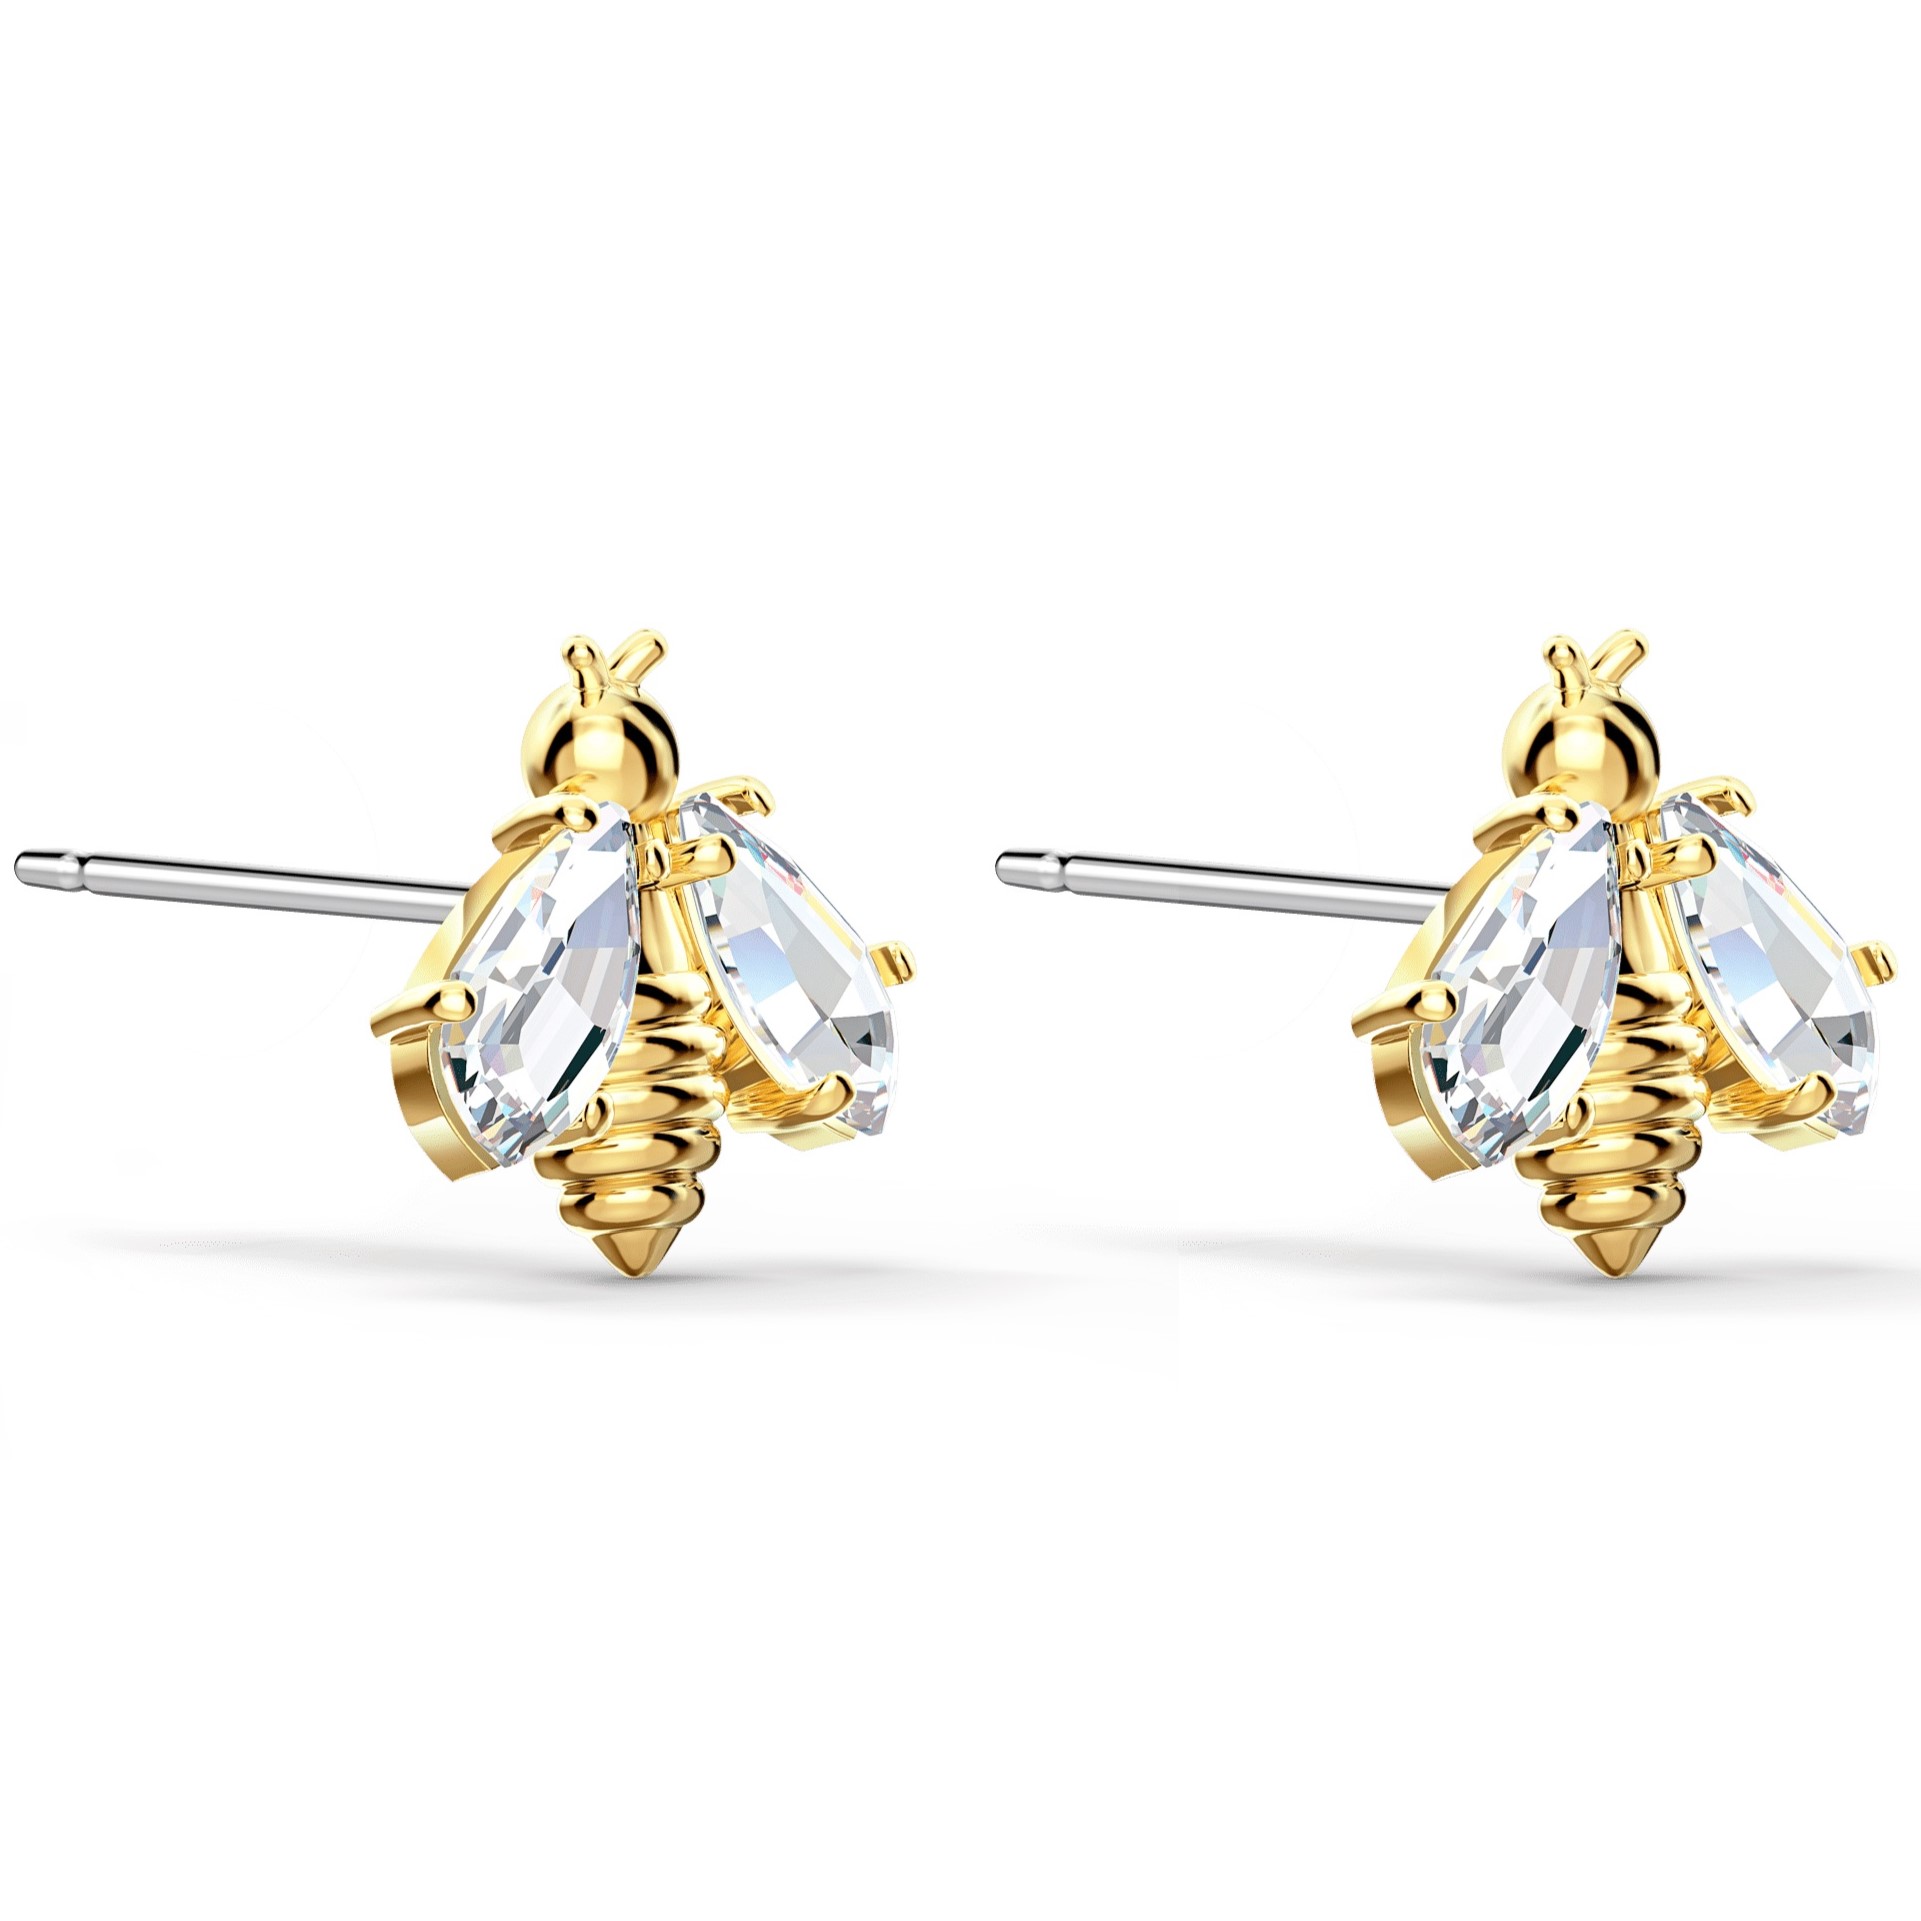 BÔNG TAI SWAROVSKI CON ONG ETERNAL FLOWER STUD EARRINGS BEE WHITE GOLD-TONE PLATED 5538087 1